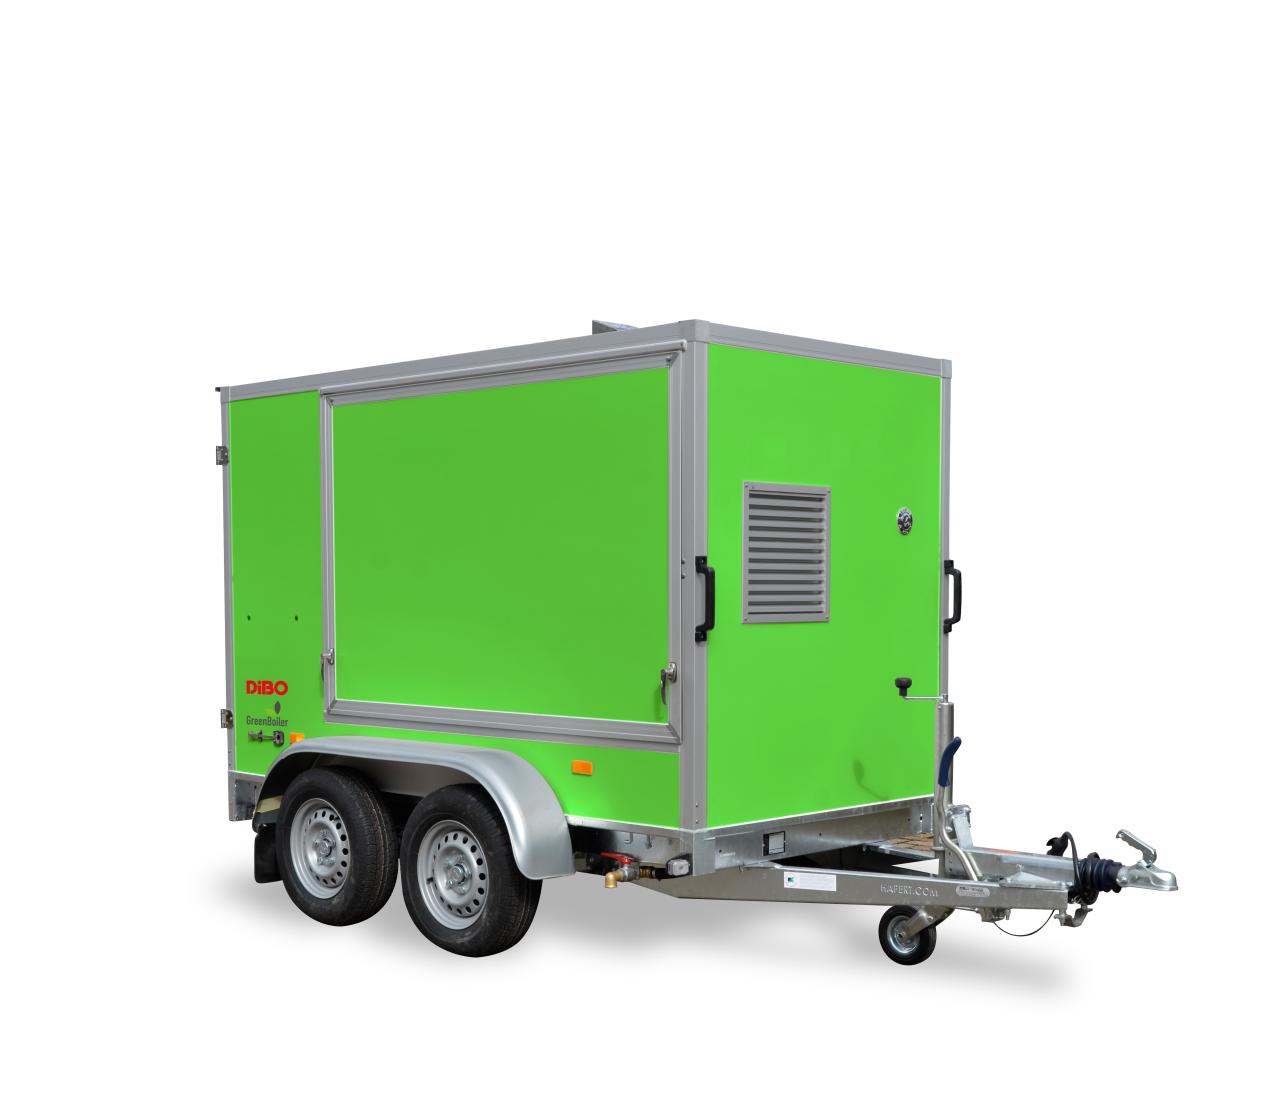 DiBO JMB-C+ hot water high-pressure trailer is perfect for heavy industrial cleaning can be put together according to your own preferences